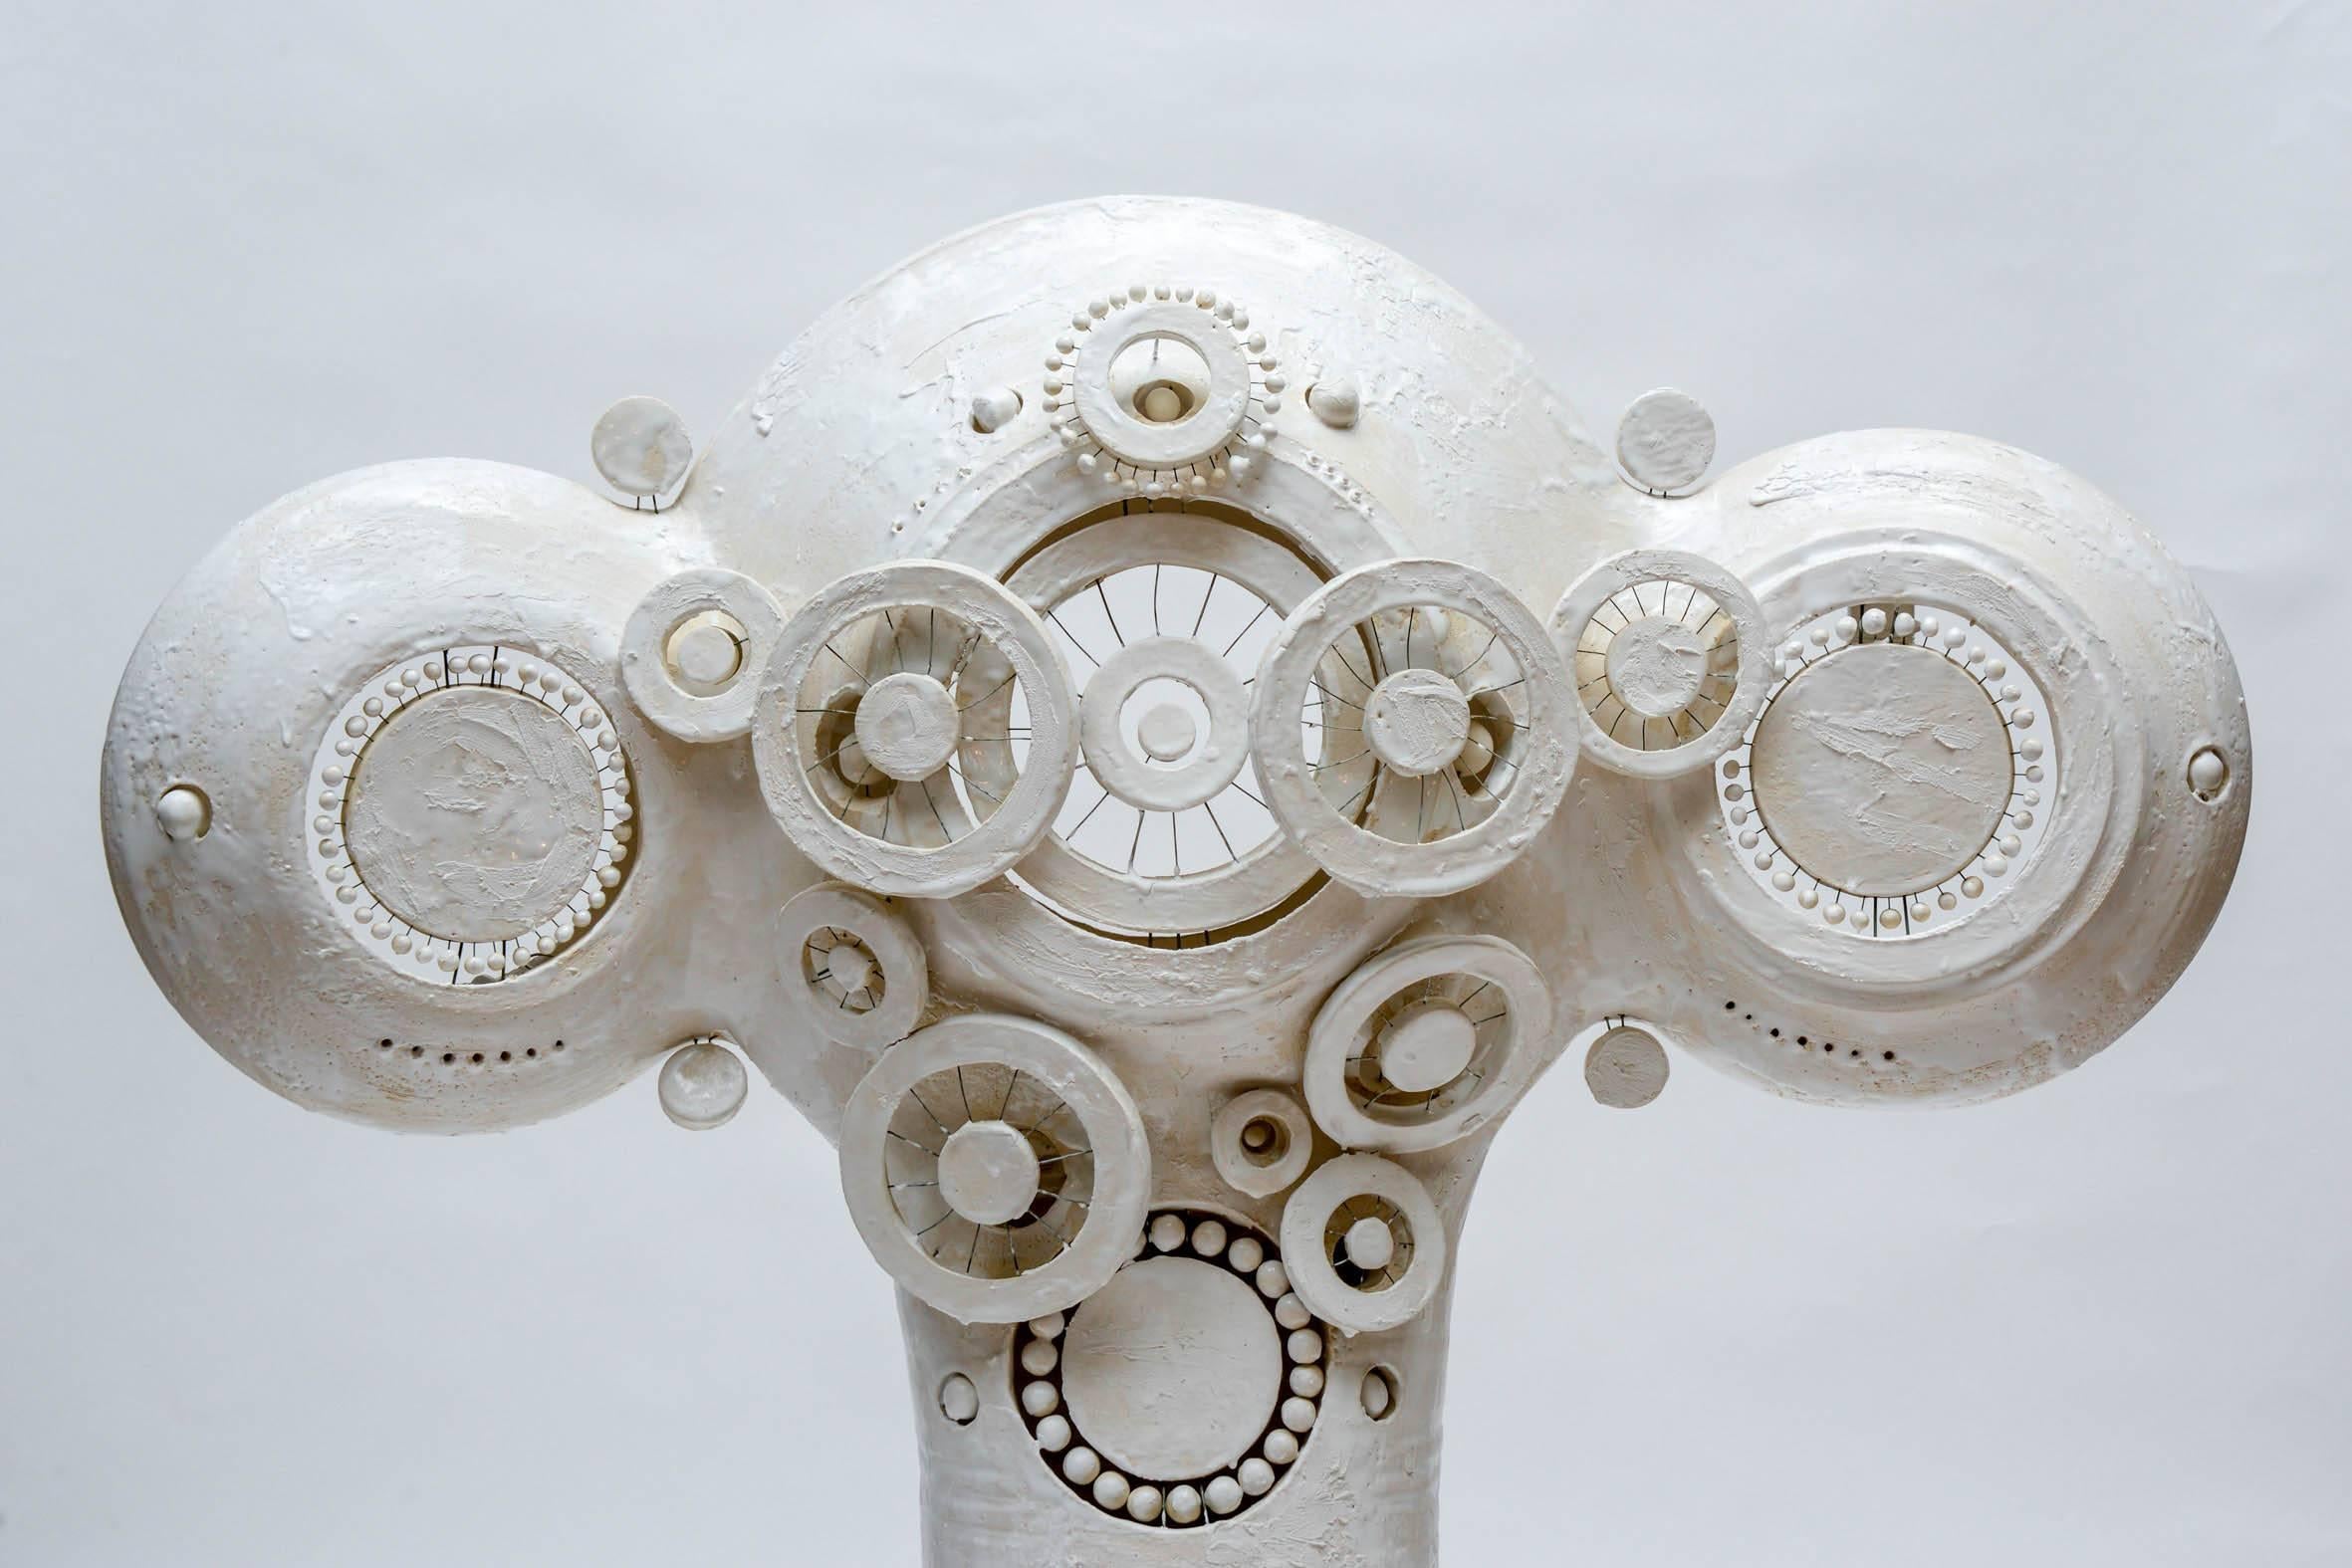 Huge lamp by the French artist Georges Pelletier entirely made of unglazed white ceramic.